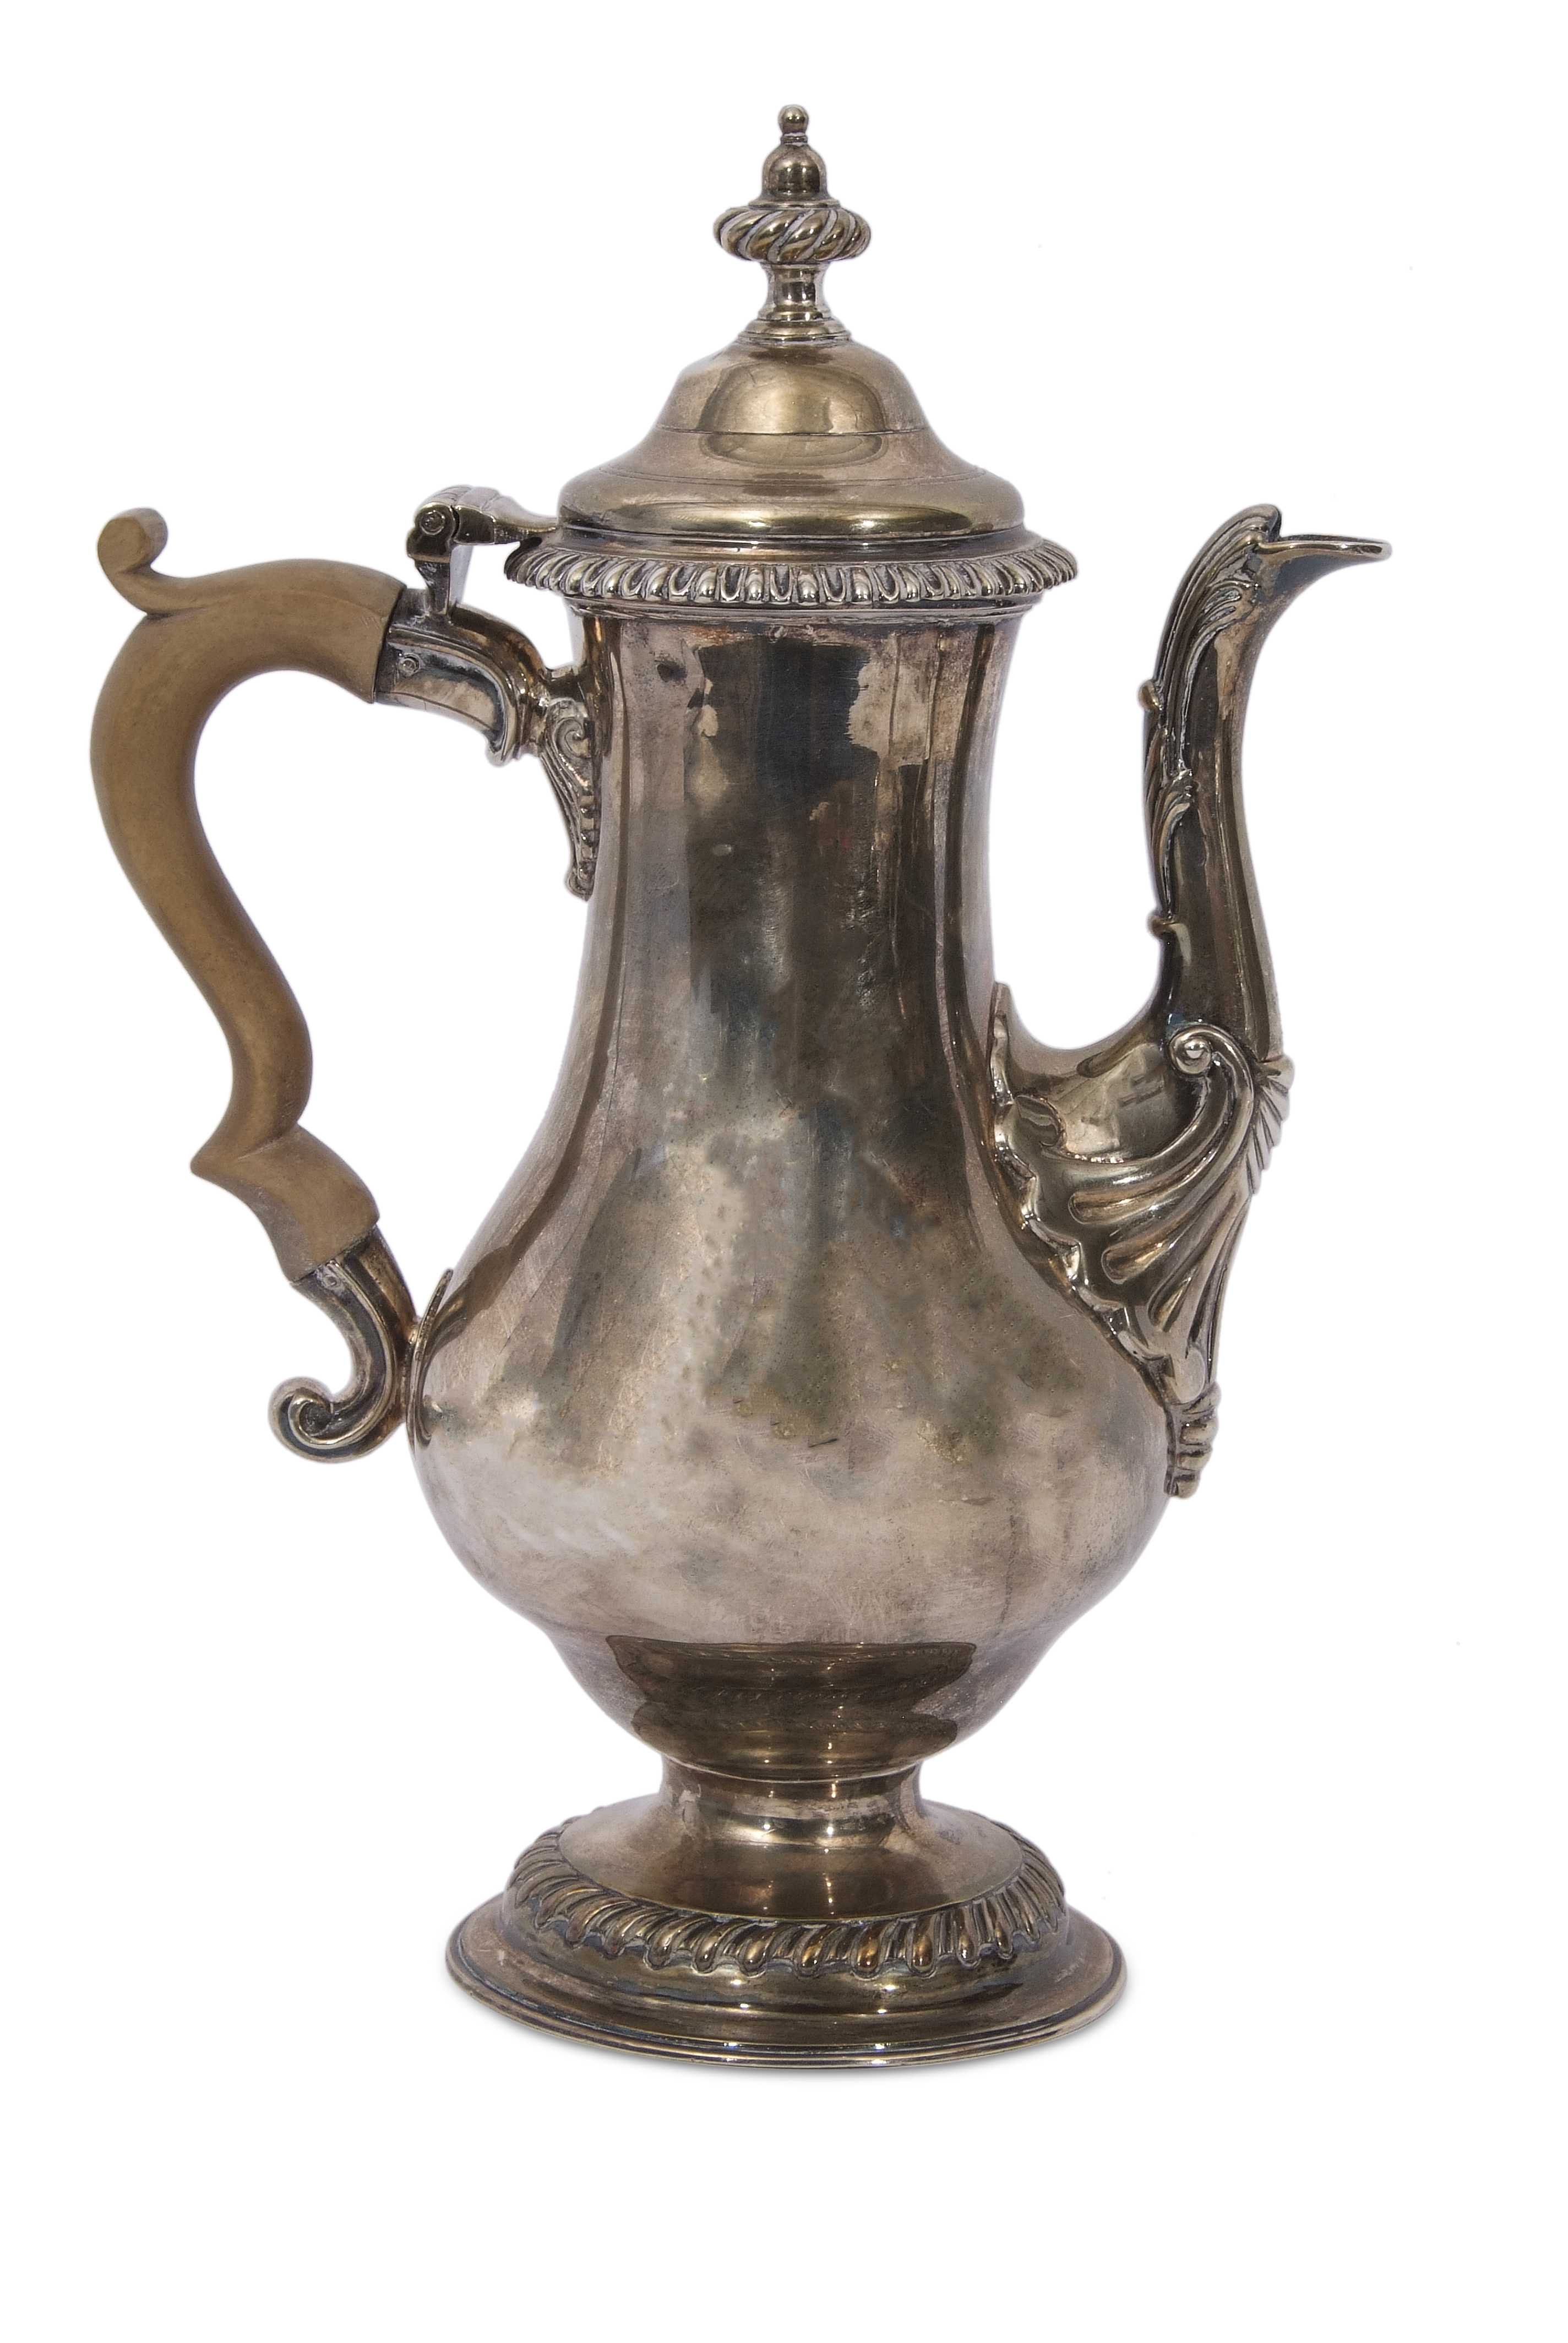 Late George II coffee pot of typical baluster form having gadrooned urn finial and rim to the hinged